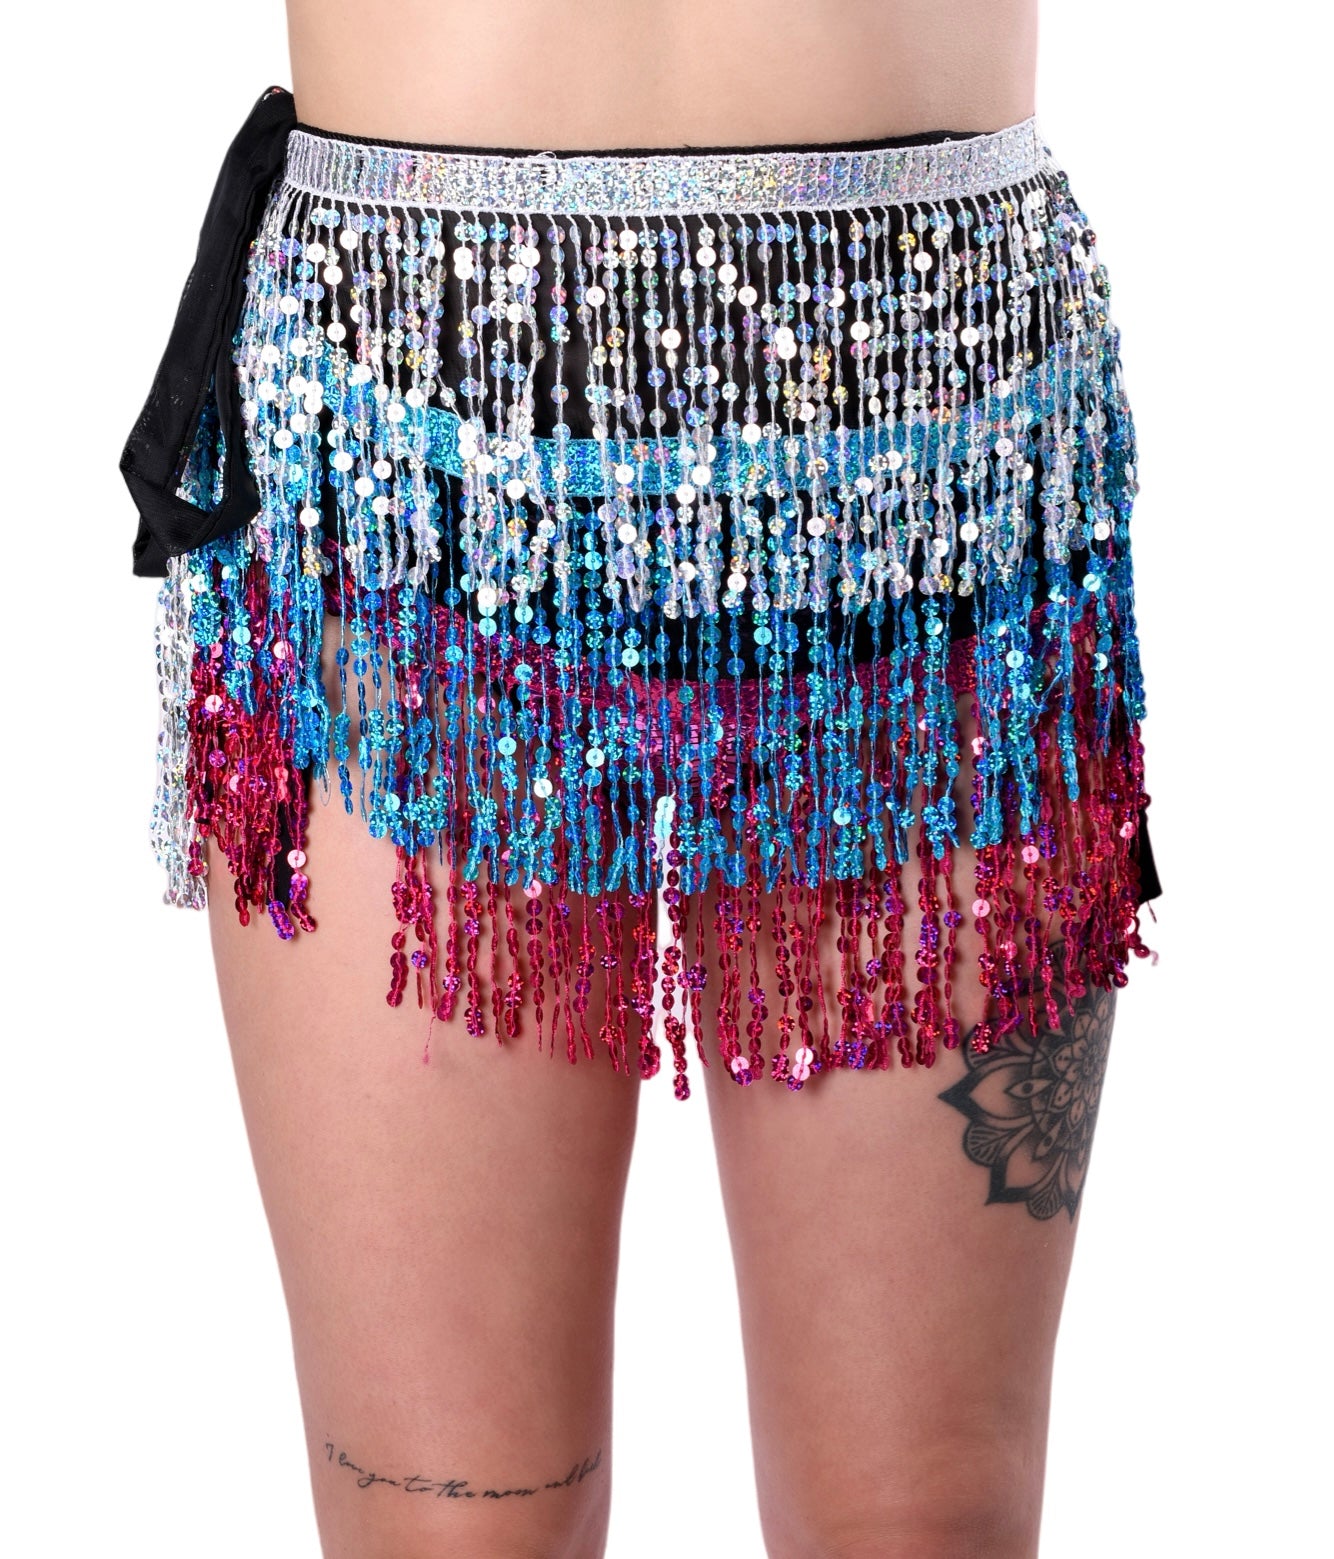 Winter View Holographic Sequin Skirt